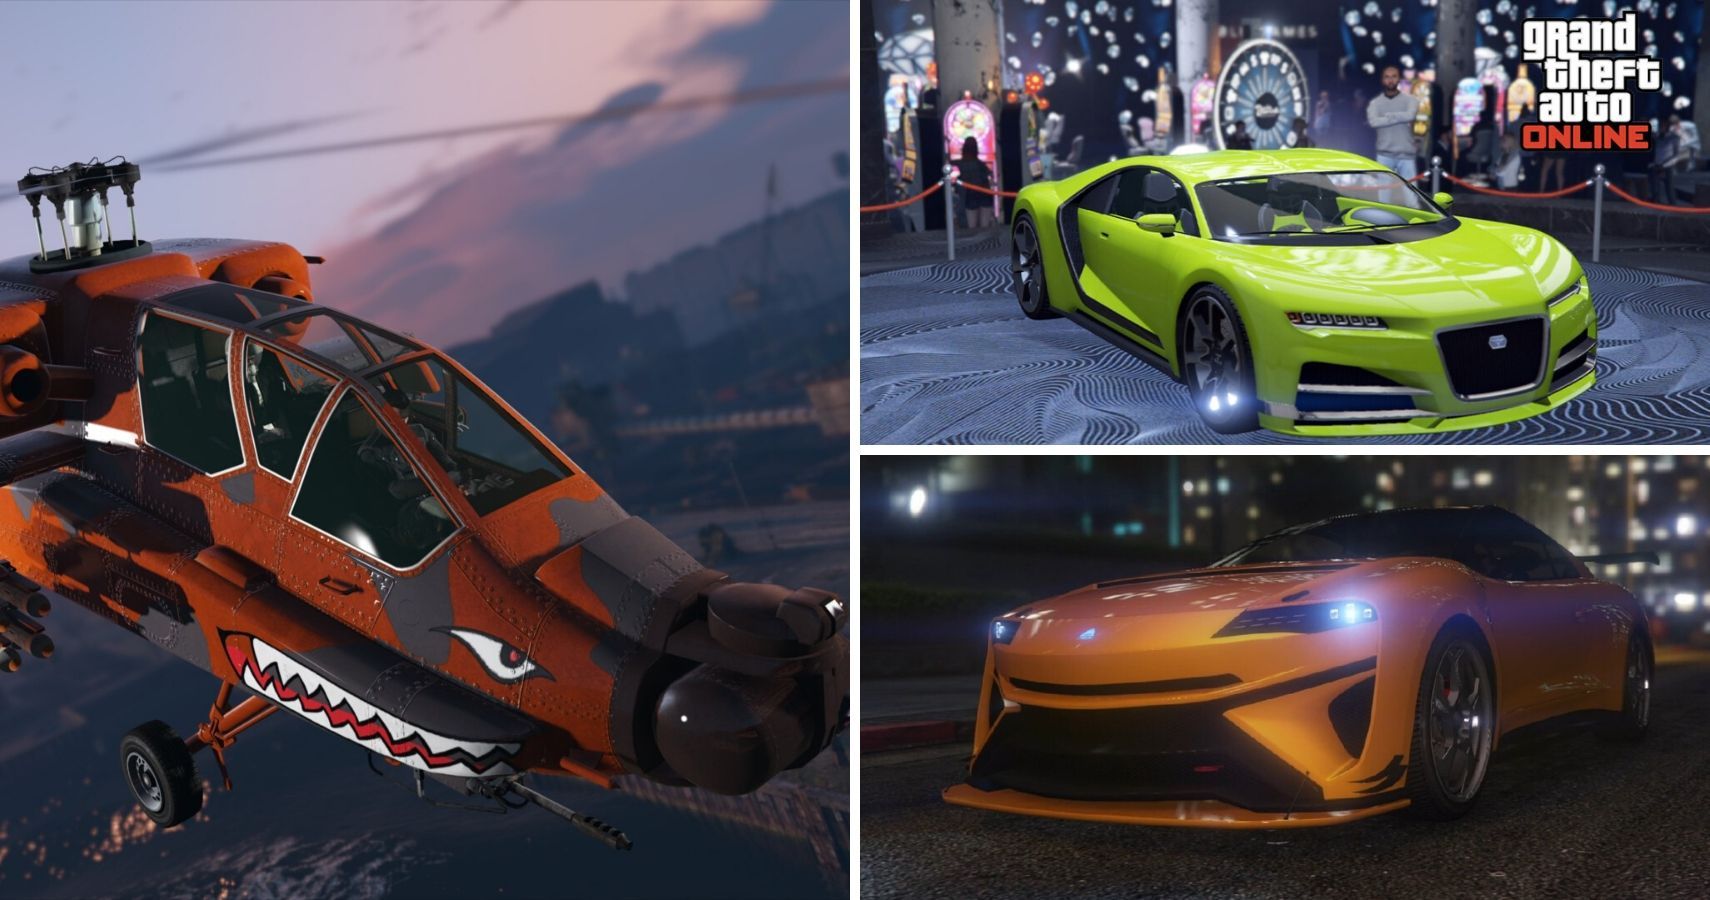 5 Most Useful Purchases In Grand Theft Auto 5 Online (& 5 Most Useless)